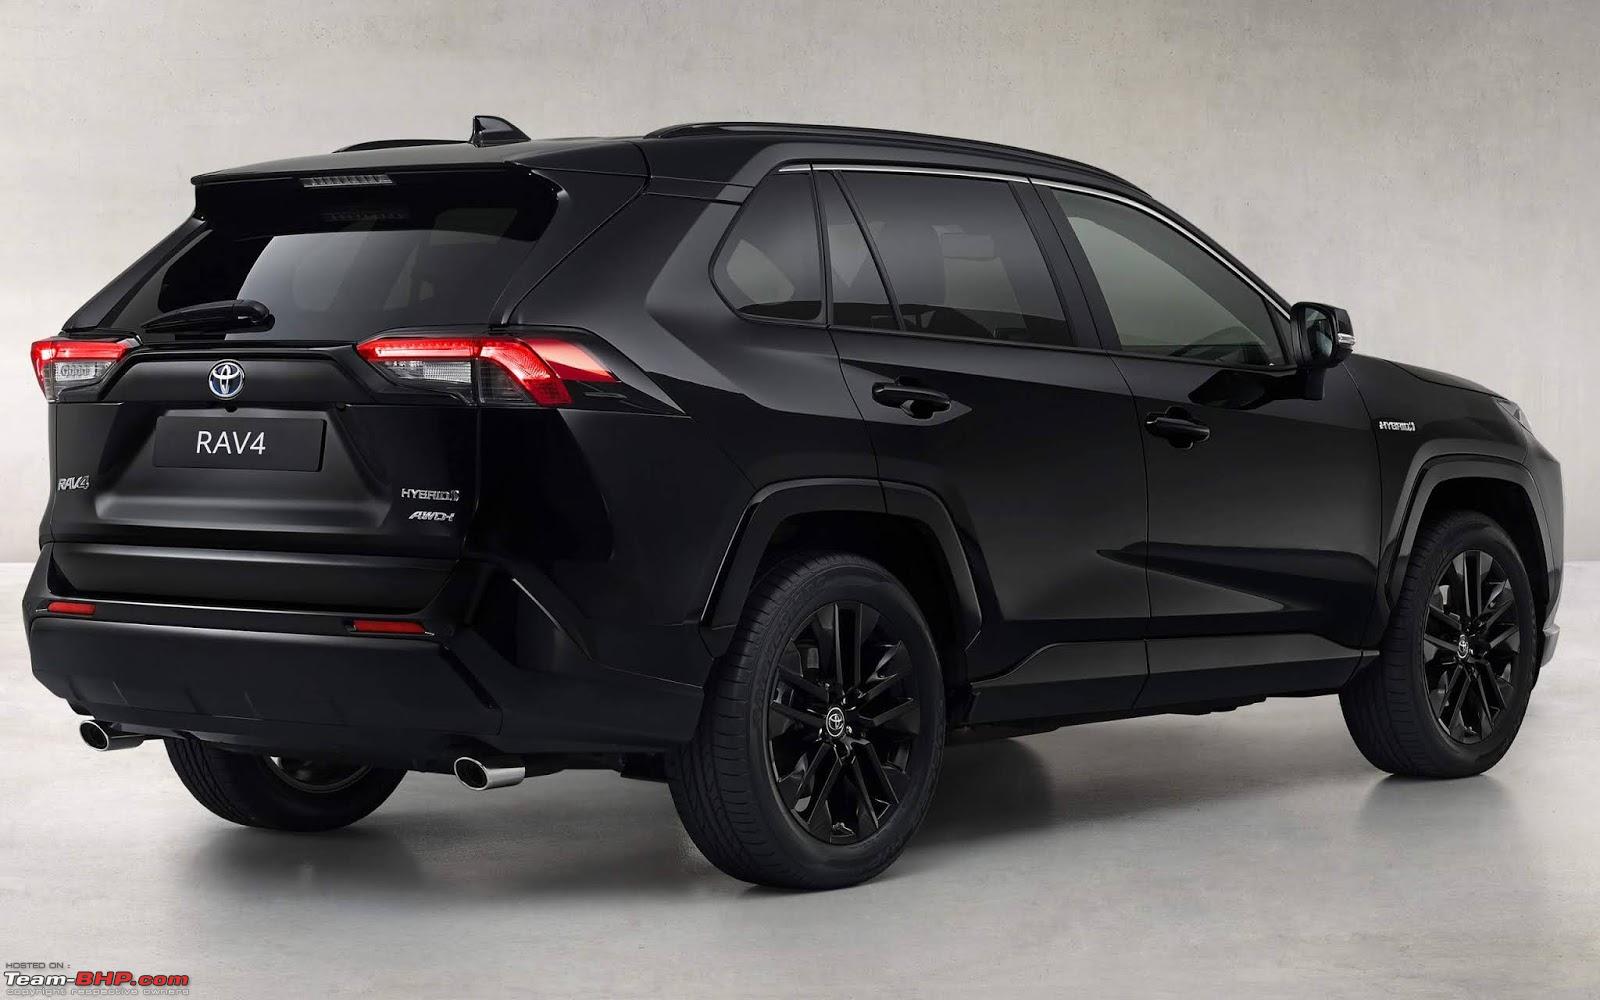 Toyota RAV4 Prime The most powerful & fuelefficient ever! 0 to 60 mph